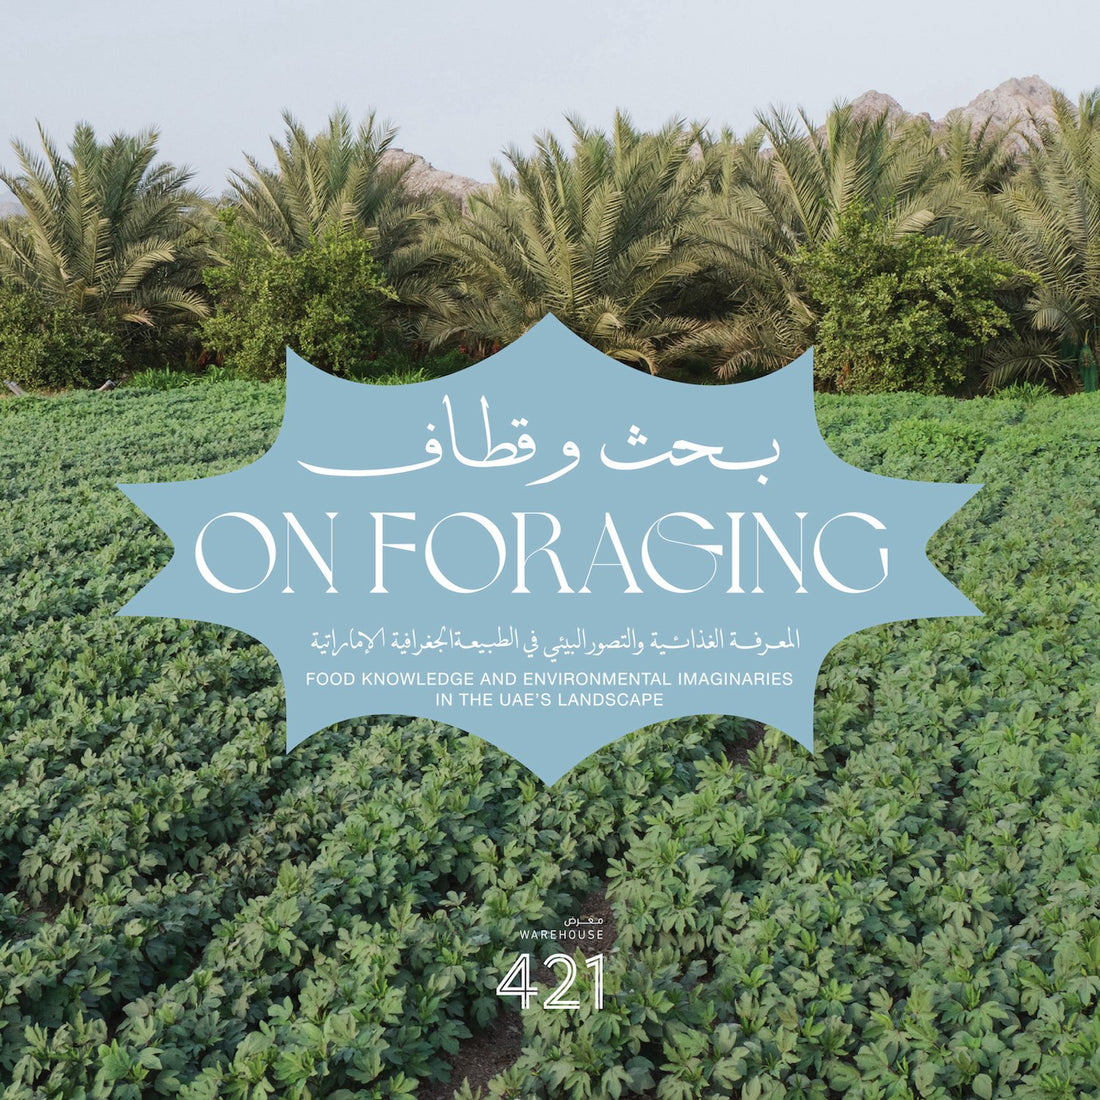 On Foraging: Food Knowledge and Environmental Imaginaries in the UAE's Landscape